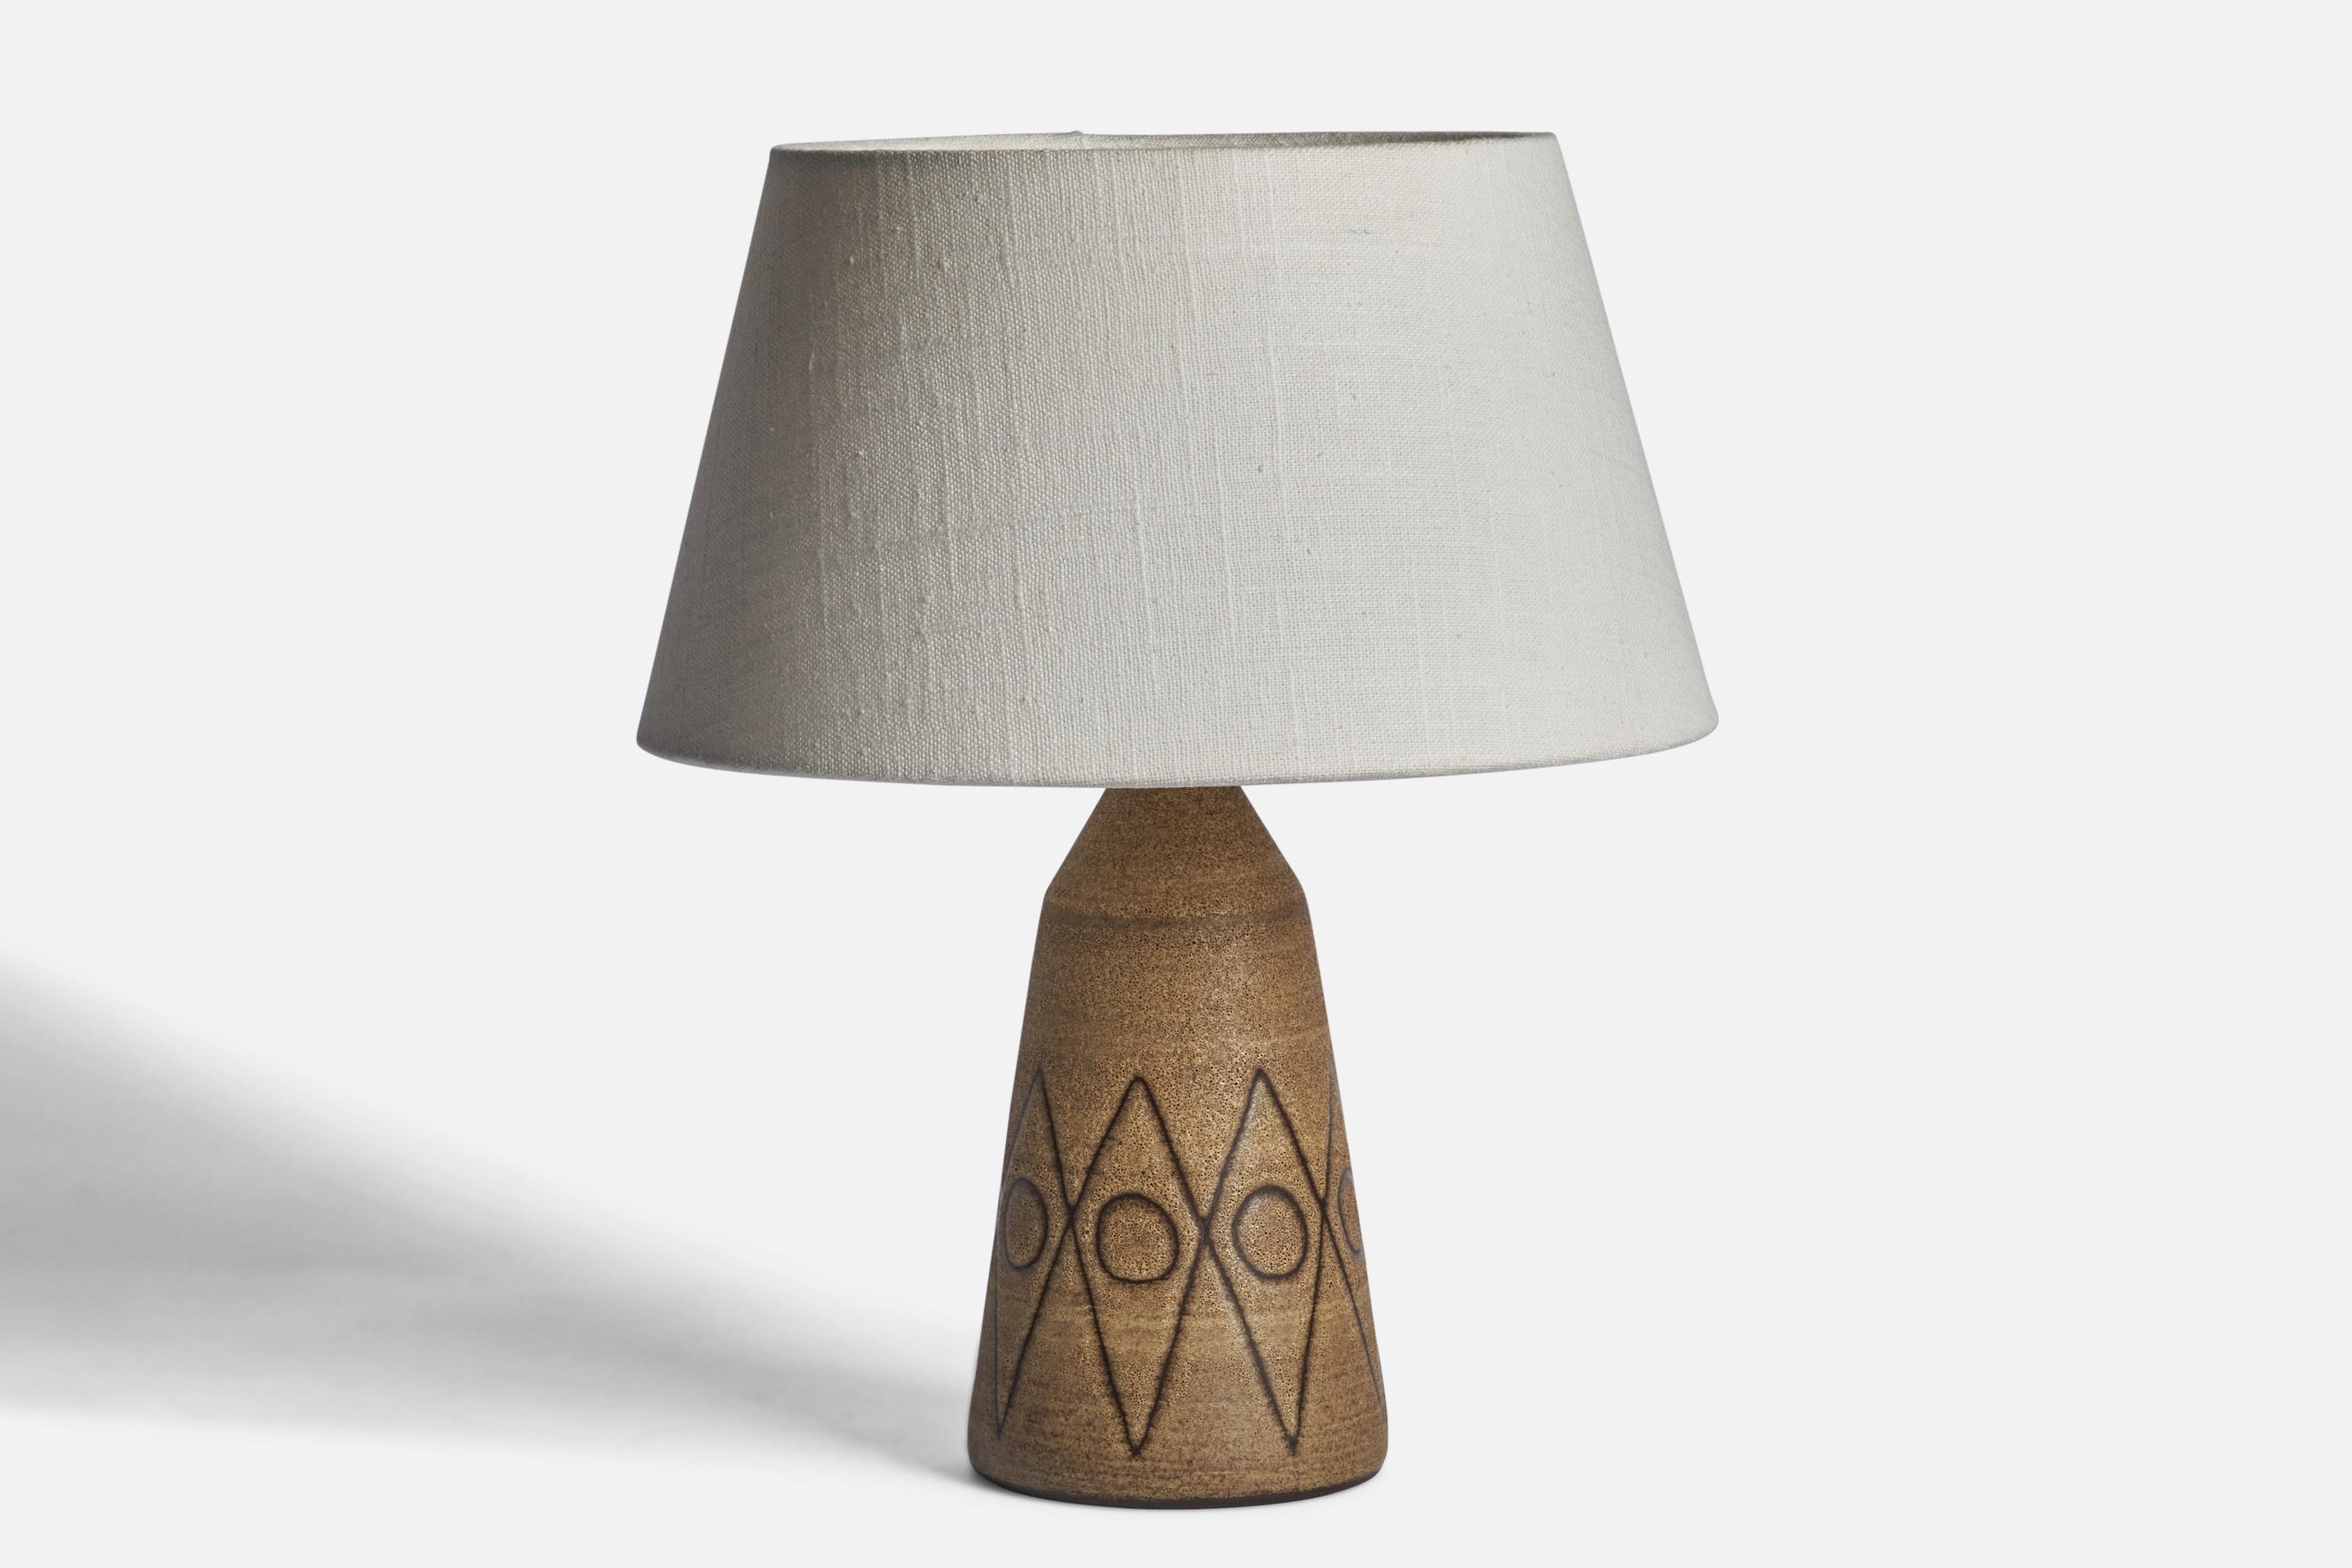 A brown-glazed incised stoneware table lamp designed and produced in Sweden, 1960s.

Dimensions of Lamp (inches): 9.25” H x 4” Diameter
Dimensions of Shade (inches): 7” Top Diameter x 10” Bottom Diameter x 5.5” H 
Dimensions of Lamp with Shade